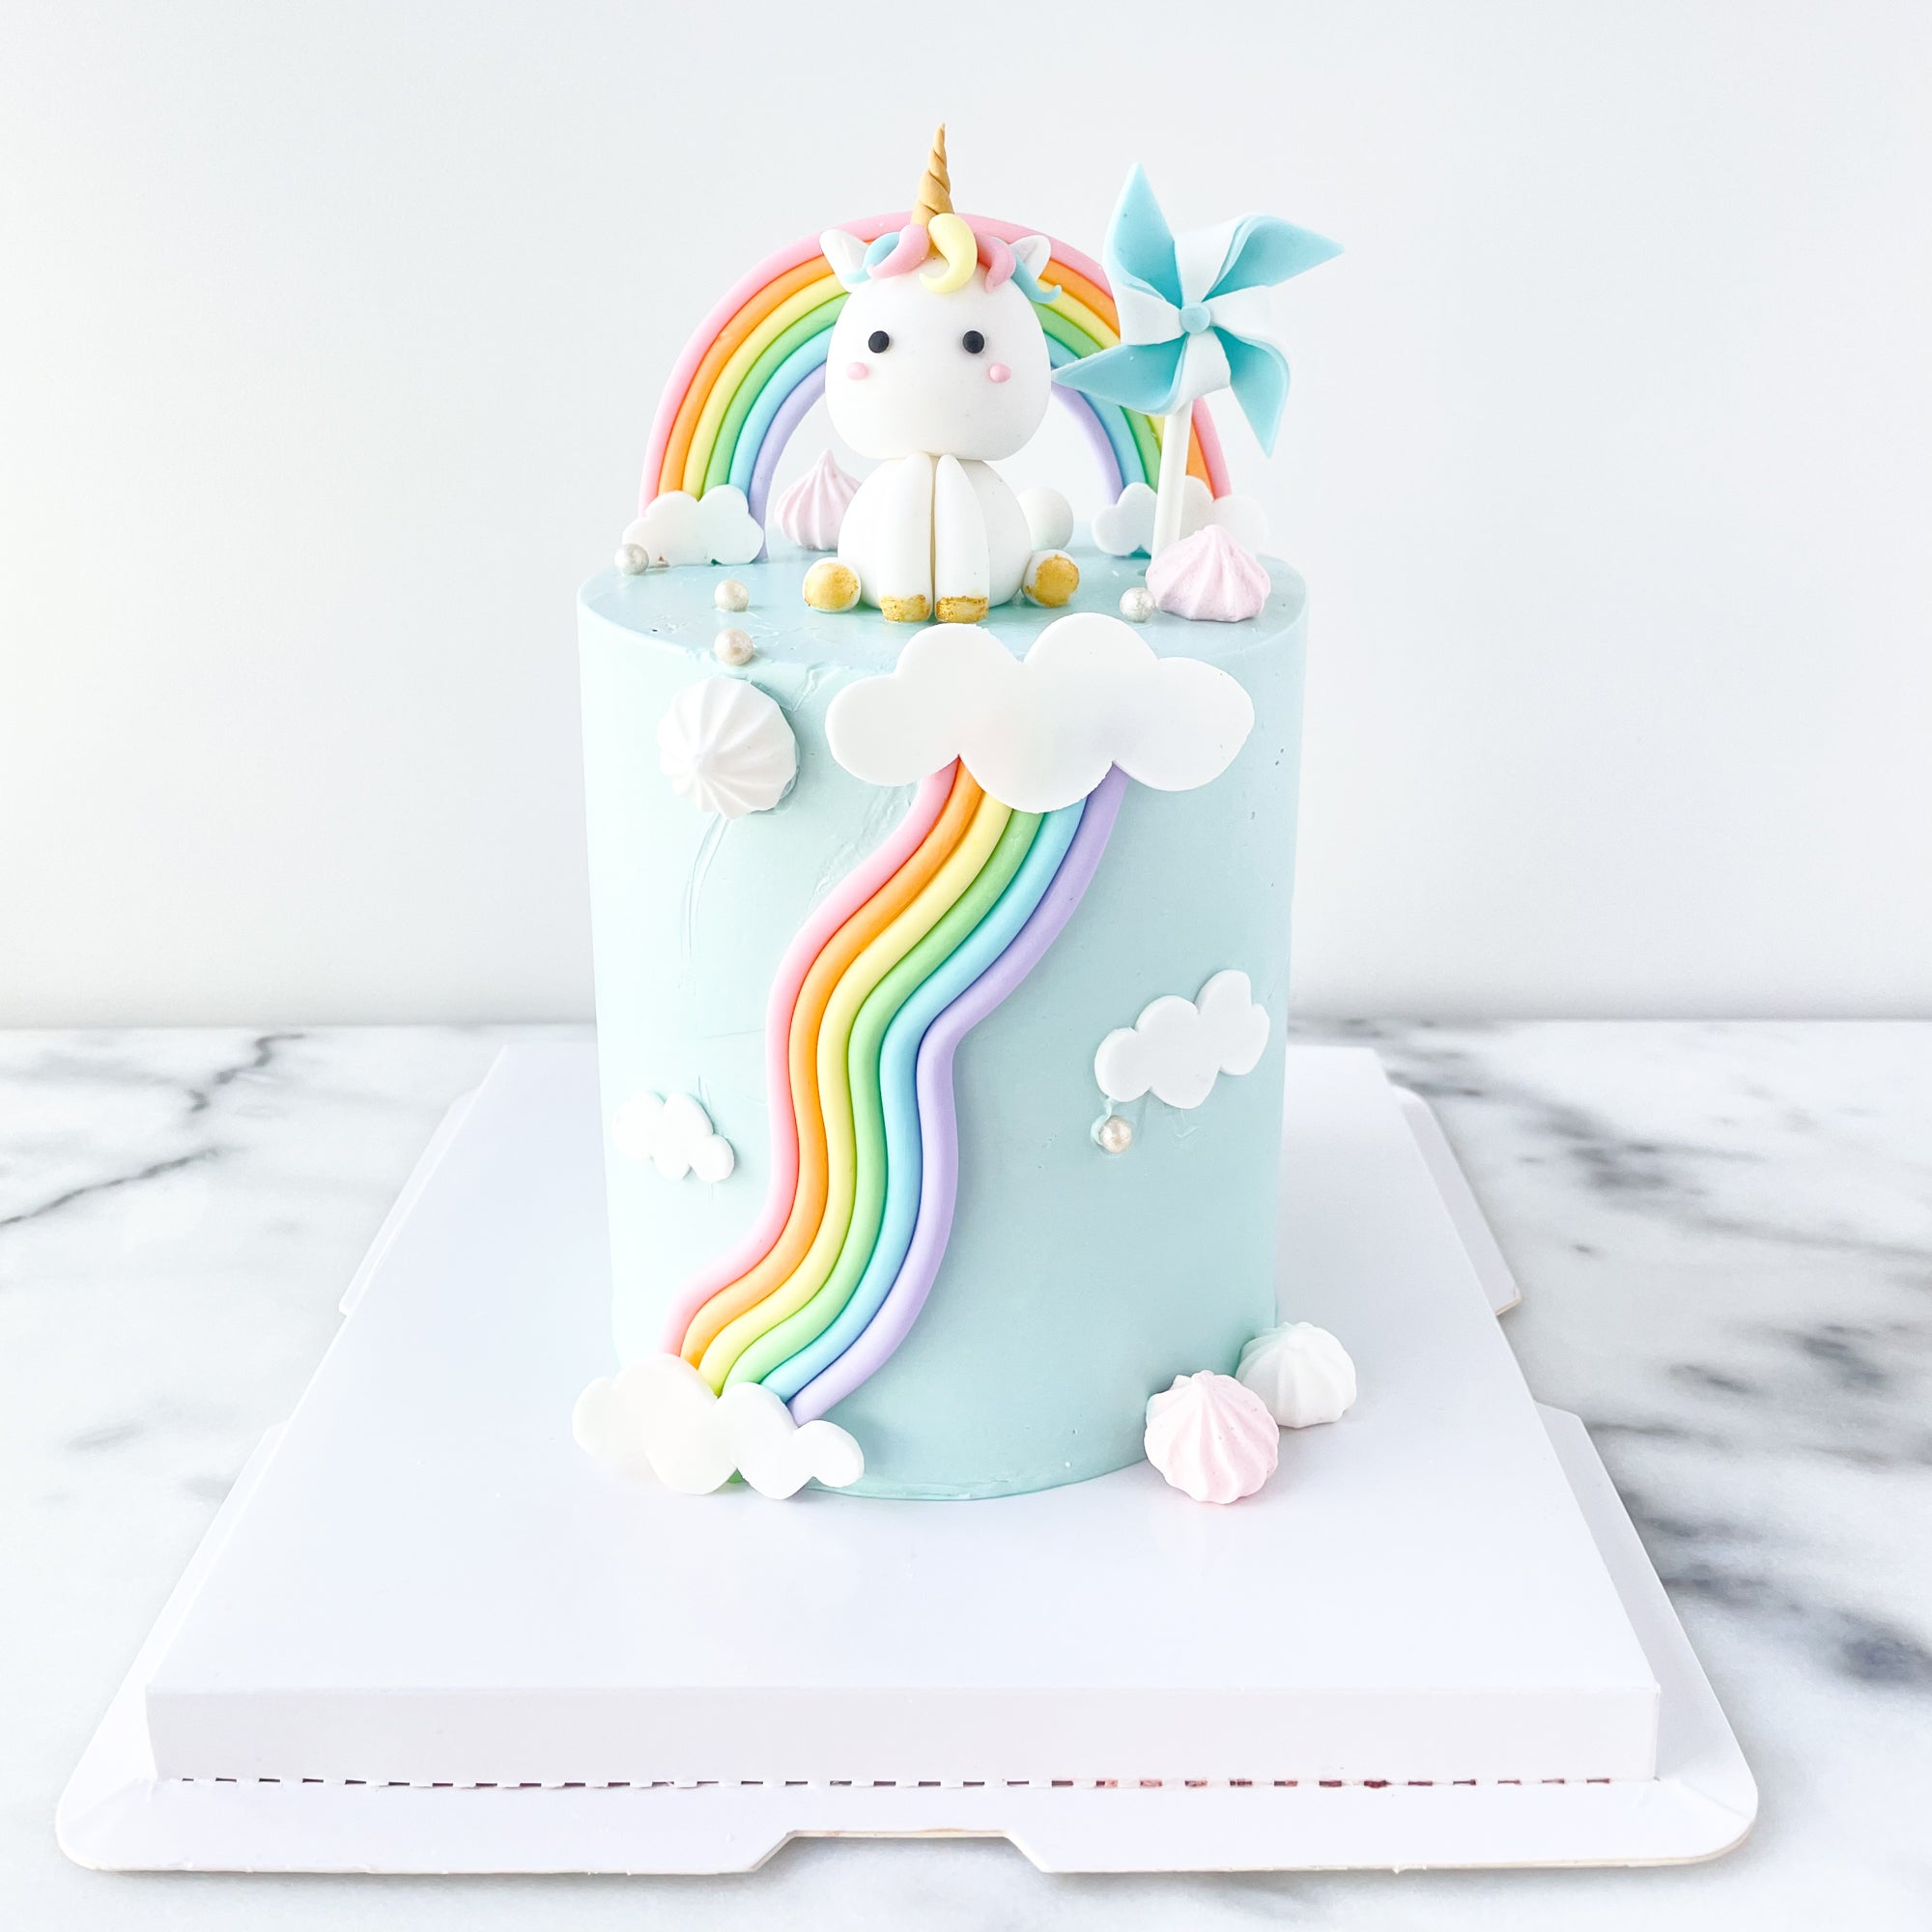 Behold, The Most Glorious Cake In The World: A Unicorn Farting A Rainbow